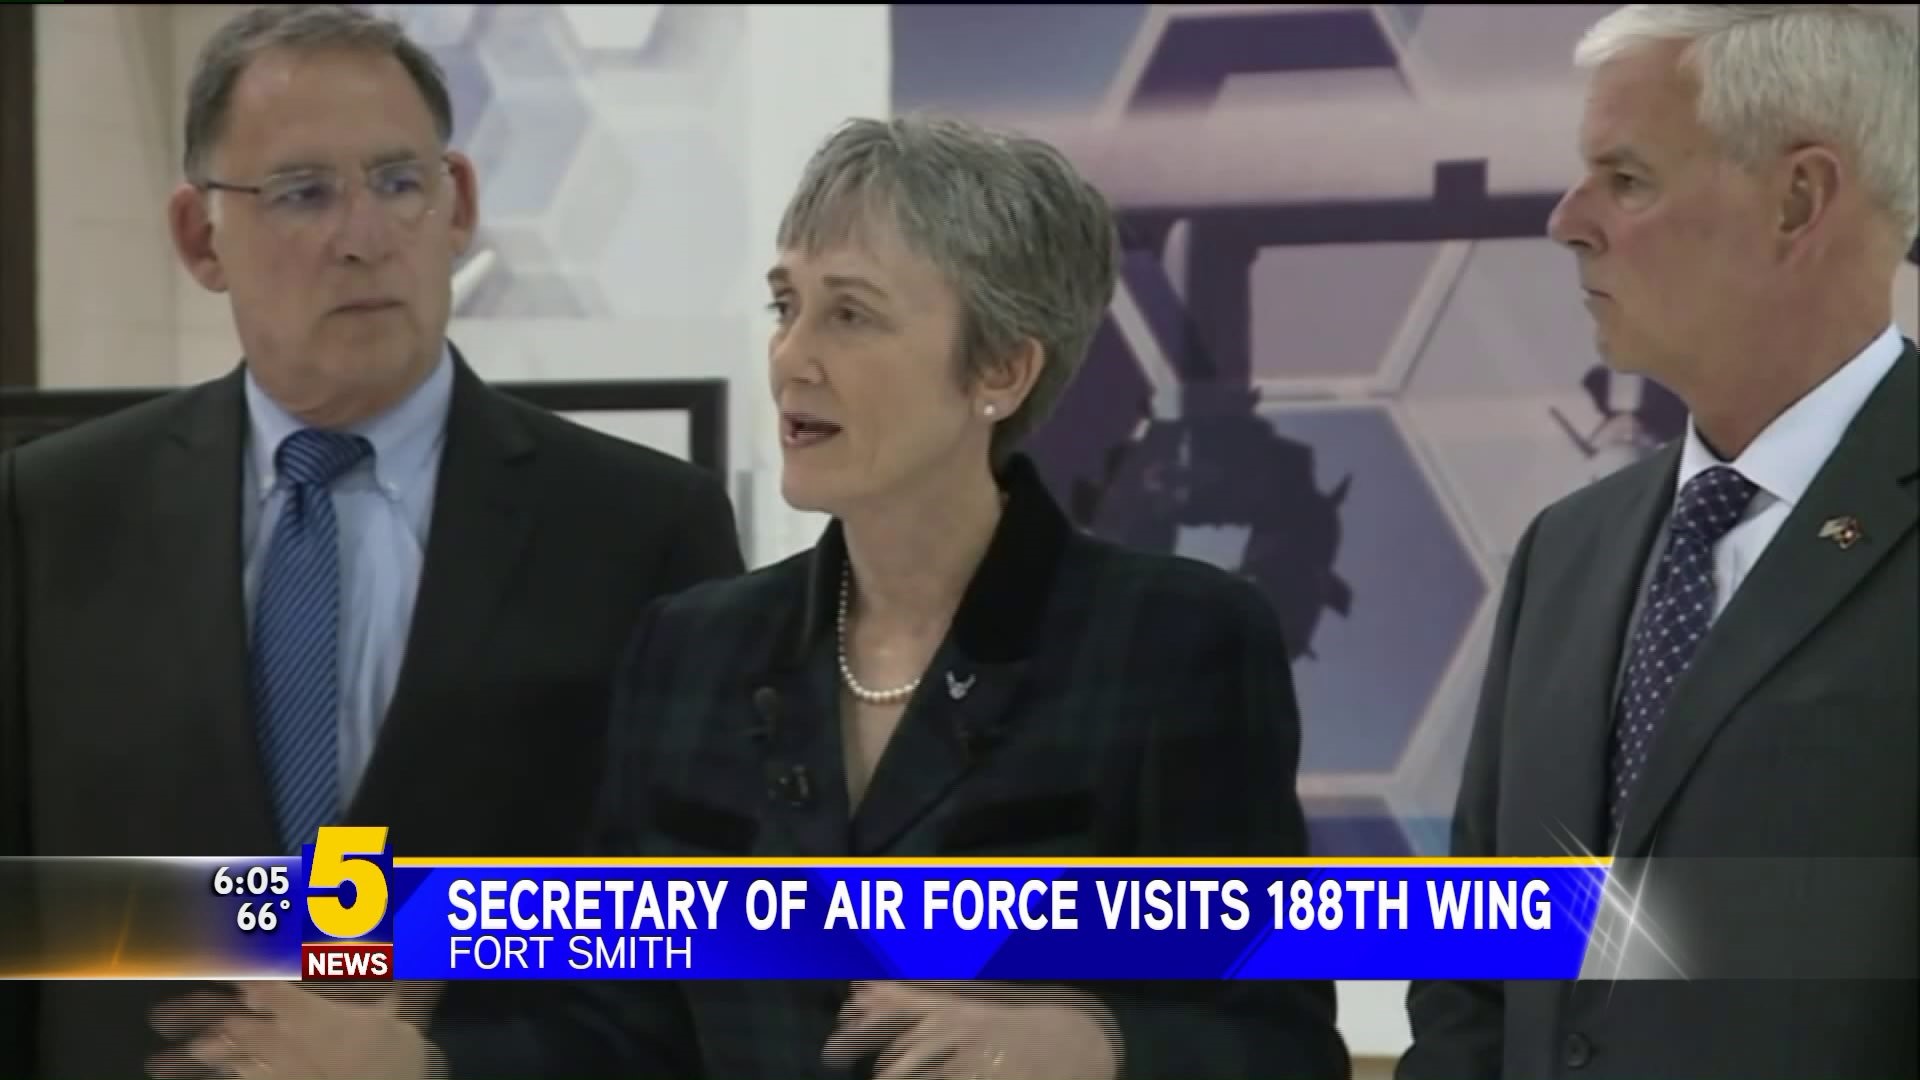 Secretary Of Air Force Visits 188th Wing